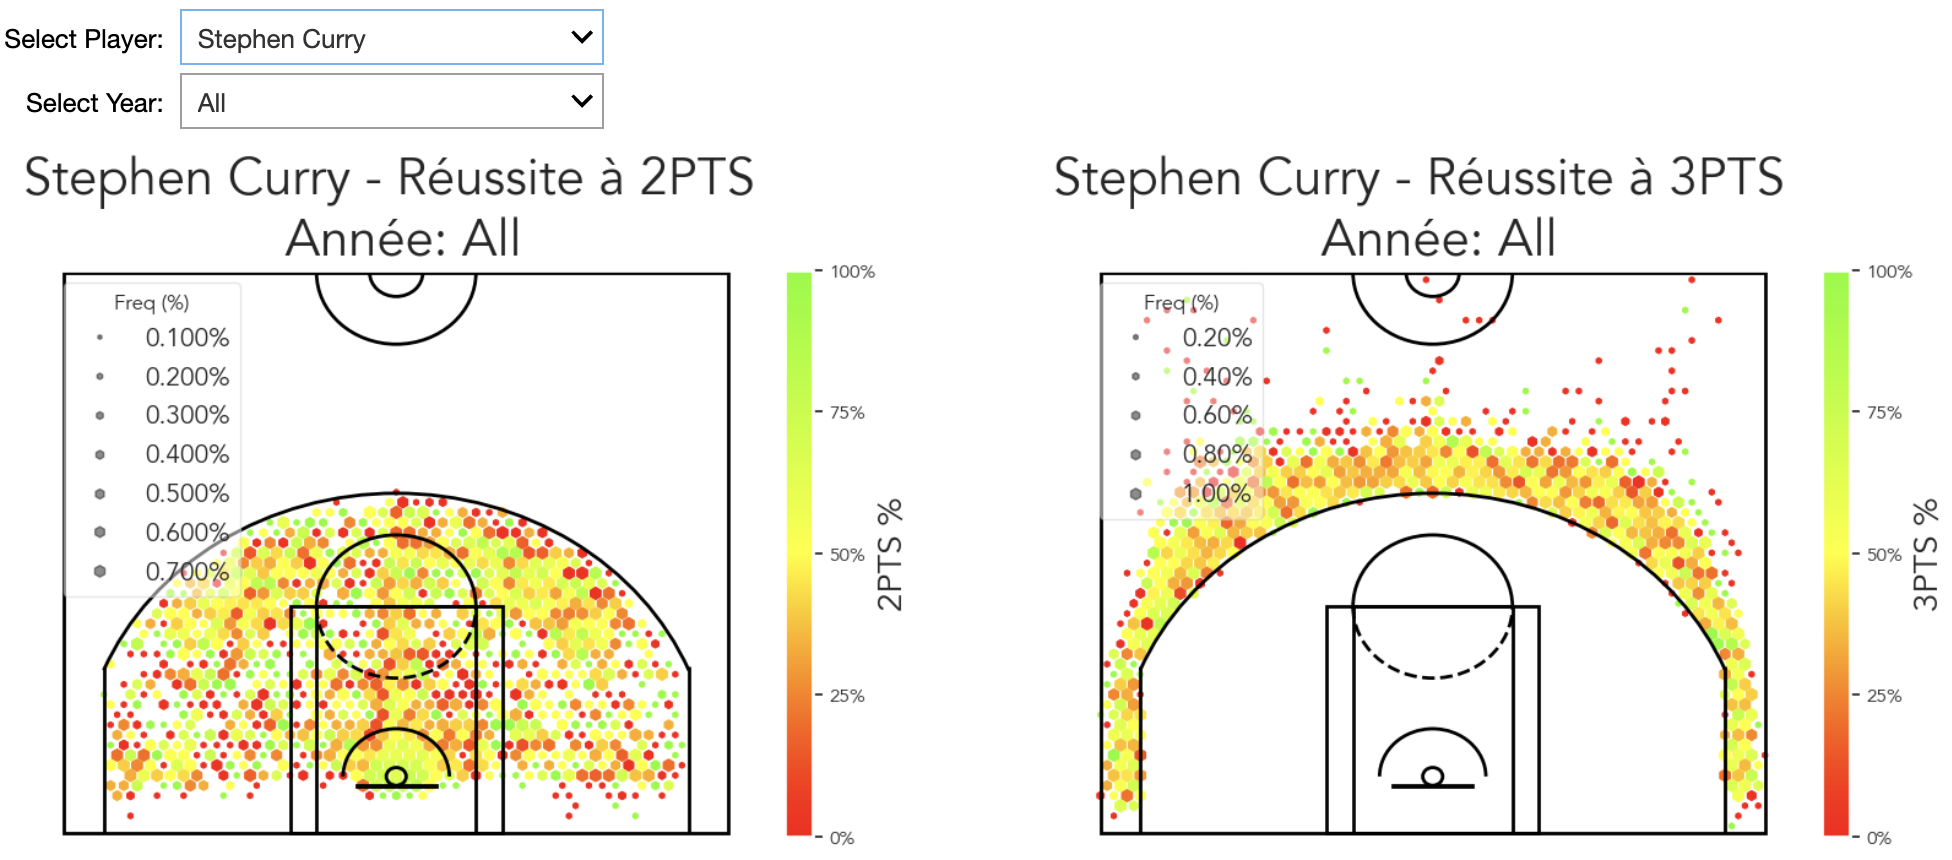 Steph-Curry-Reussite-tirs